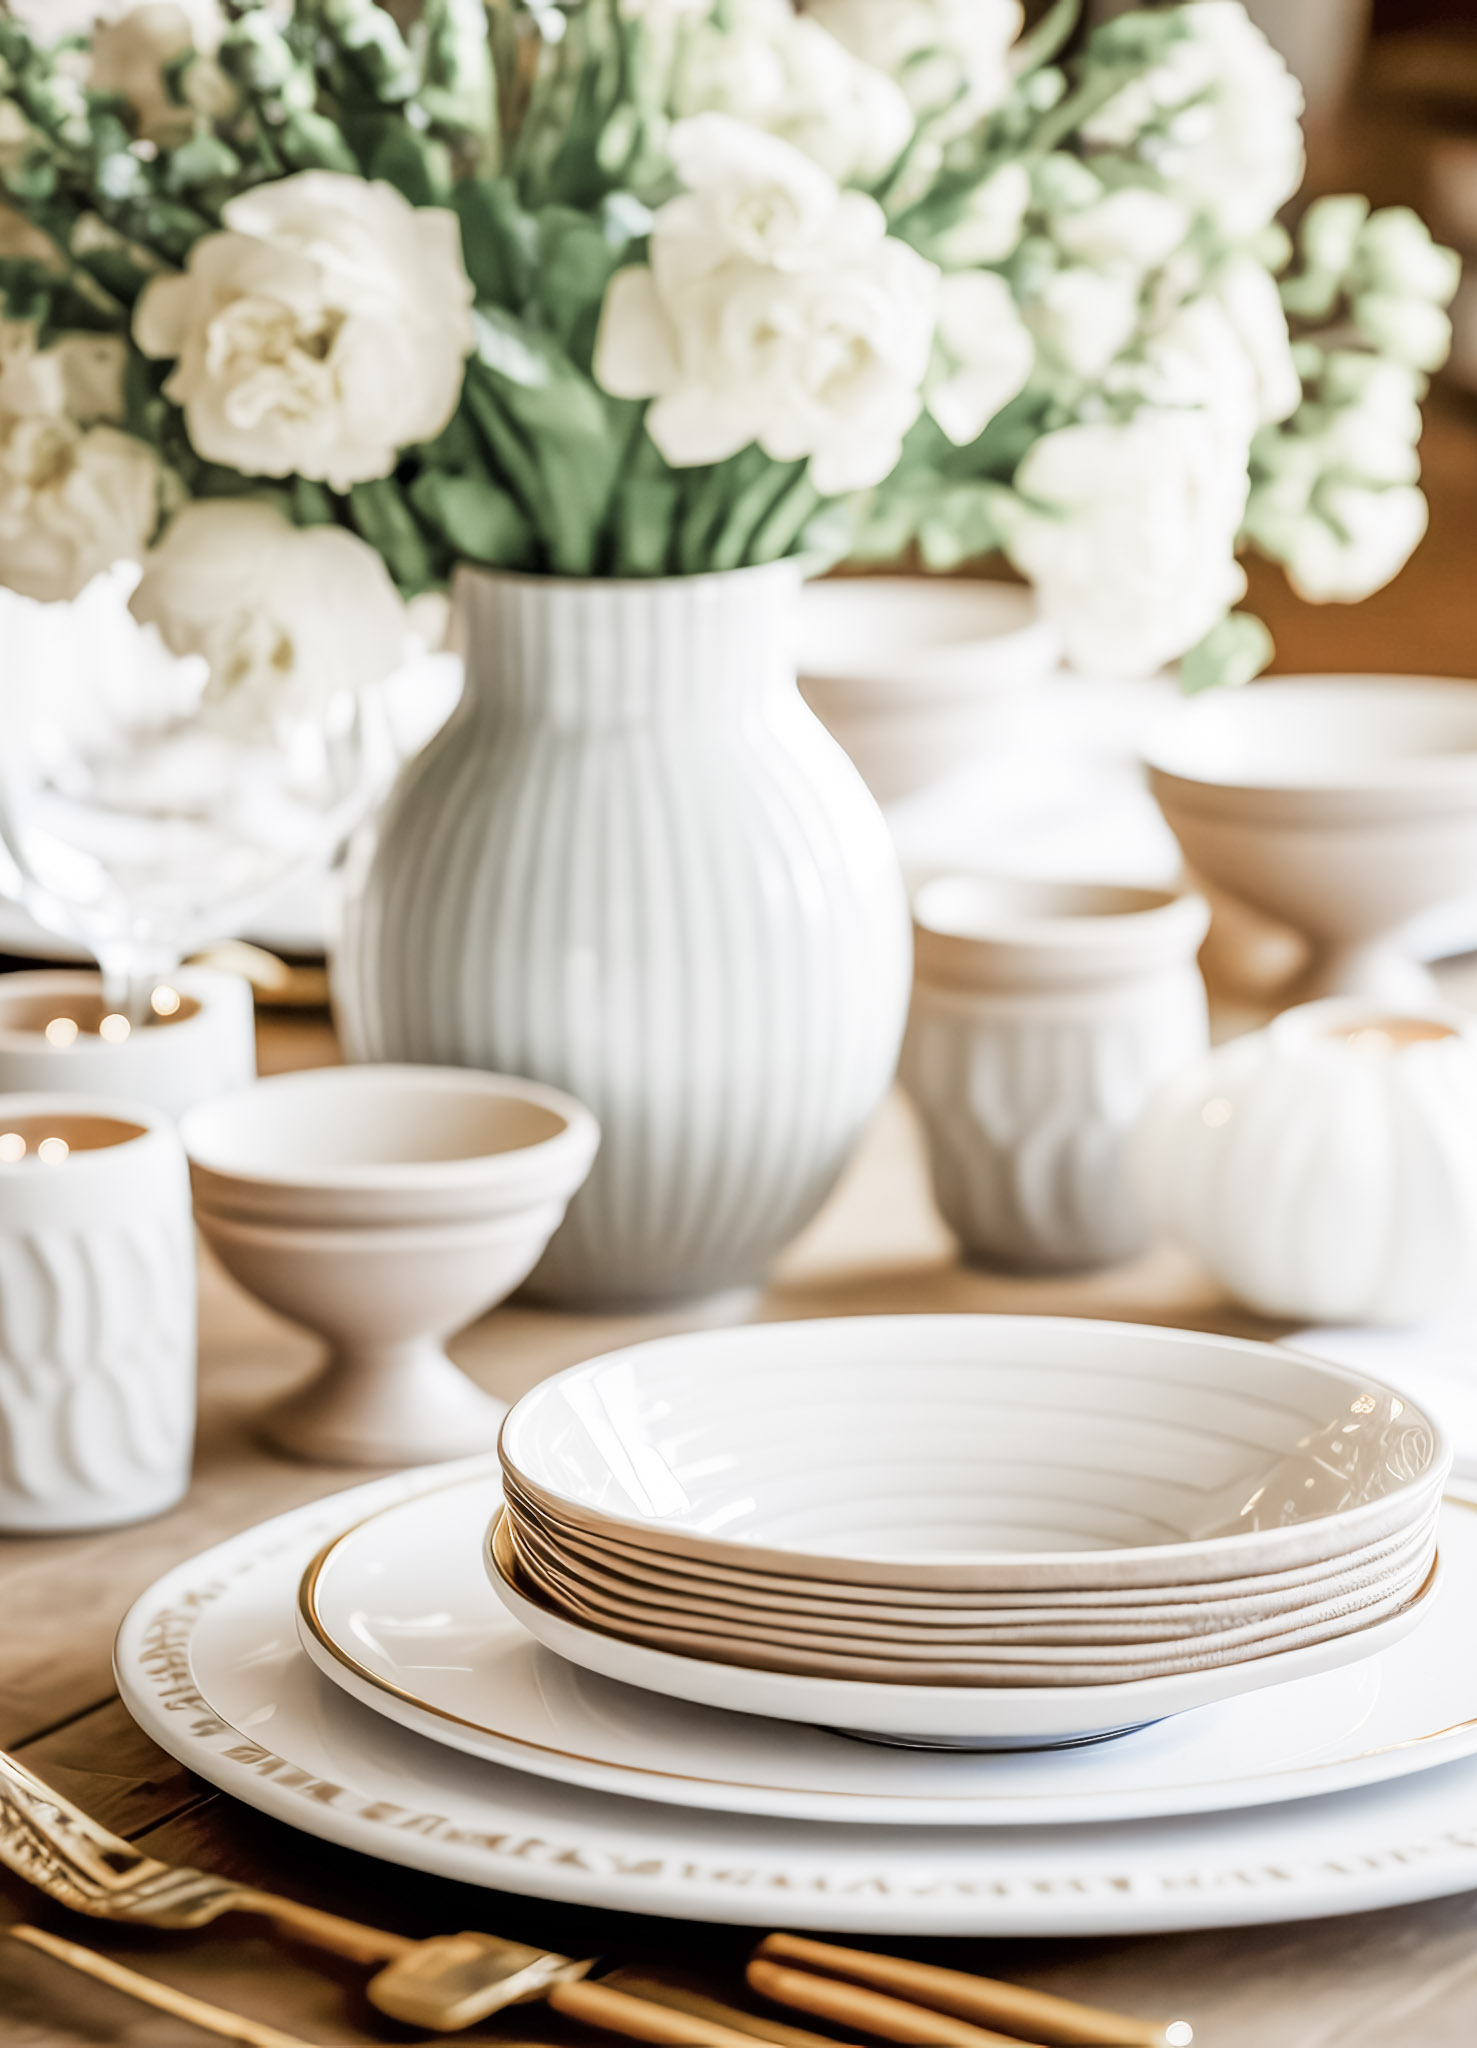 A beautiful white tablescape with white and neutral plates. There is a flower arrangement with white flowers. This article covers choosing the perfect ceramic serveware for your table settings.